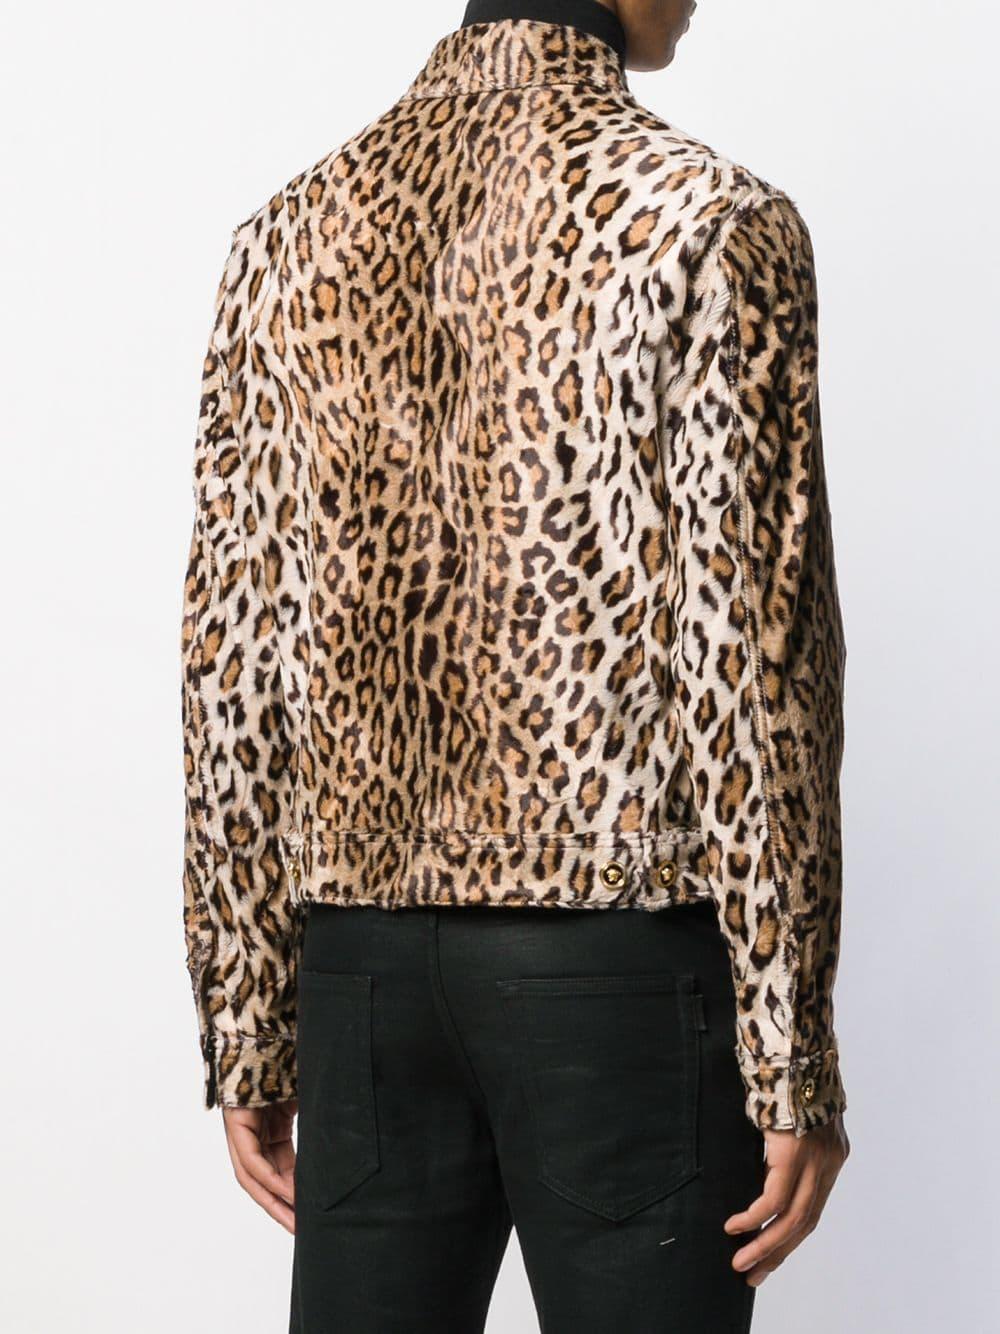 Versace Leopard Print Single Breasted Jacket in Brown for Men - Lyst